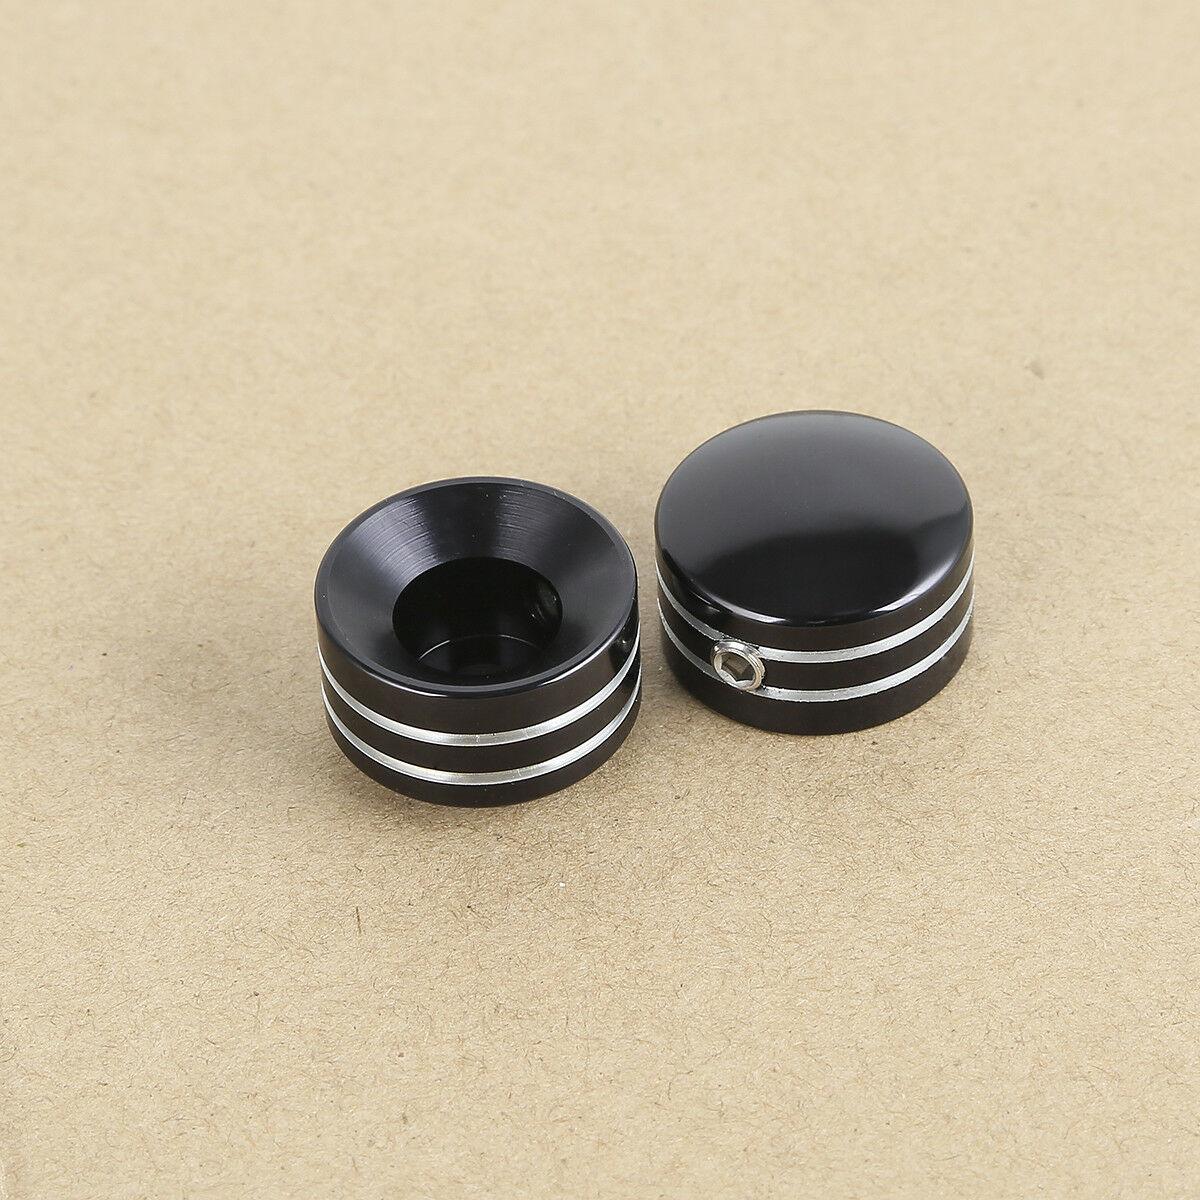 Head Bolt Covers Fit For Harley Davidson Sportster 883 1200 86-17 Twin Cam 99-17 - Moto Life Products